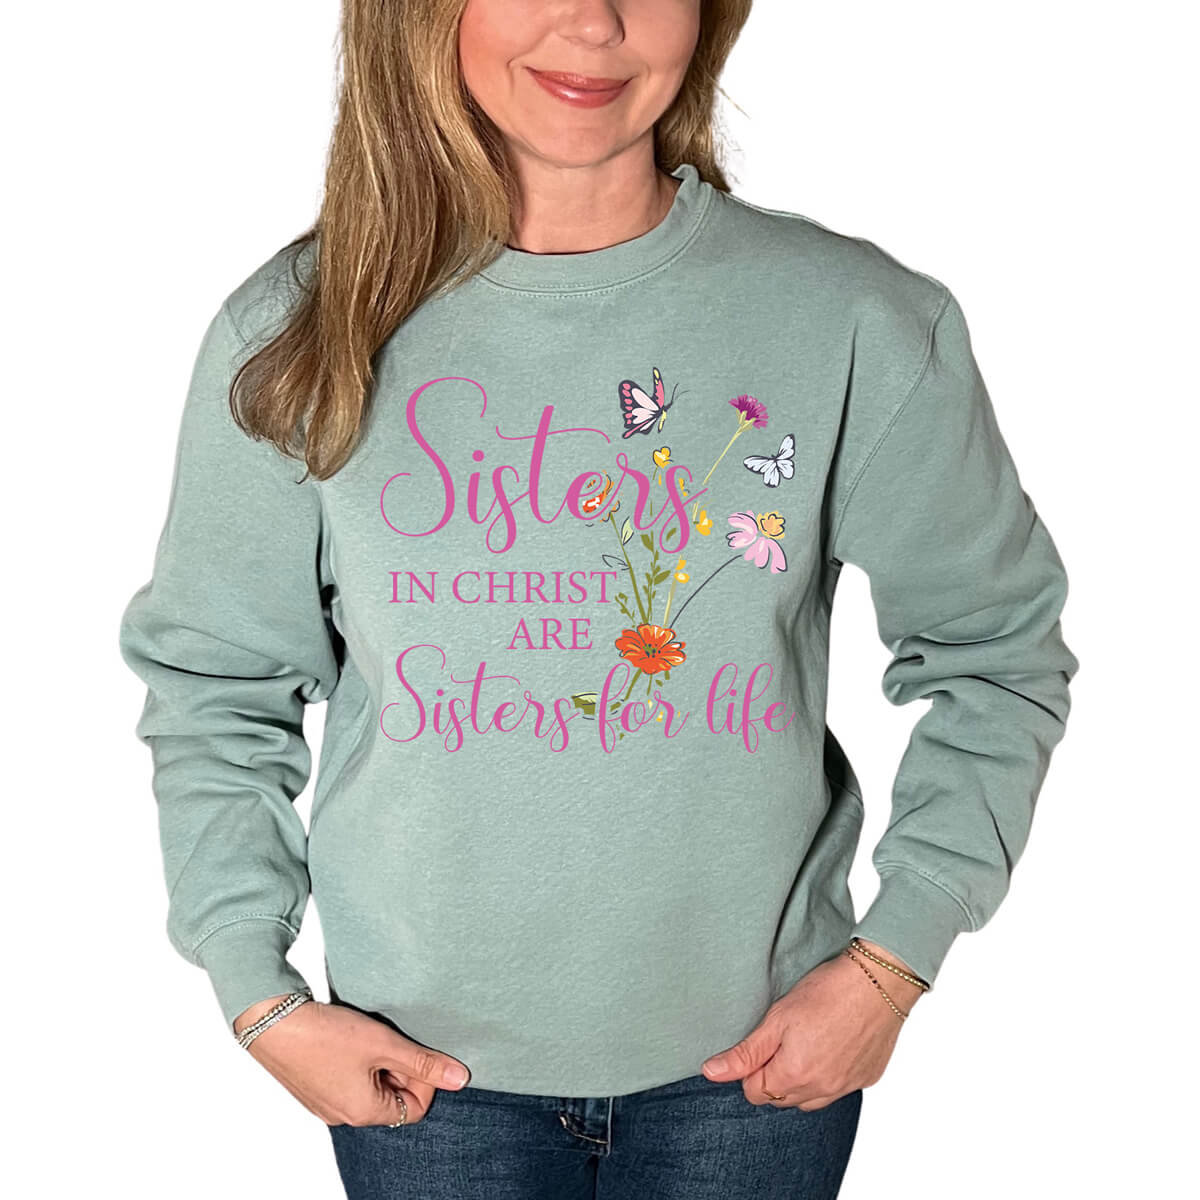 Sisters In Christ Are Sisters For Life Crewneck Sweatshirt